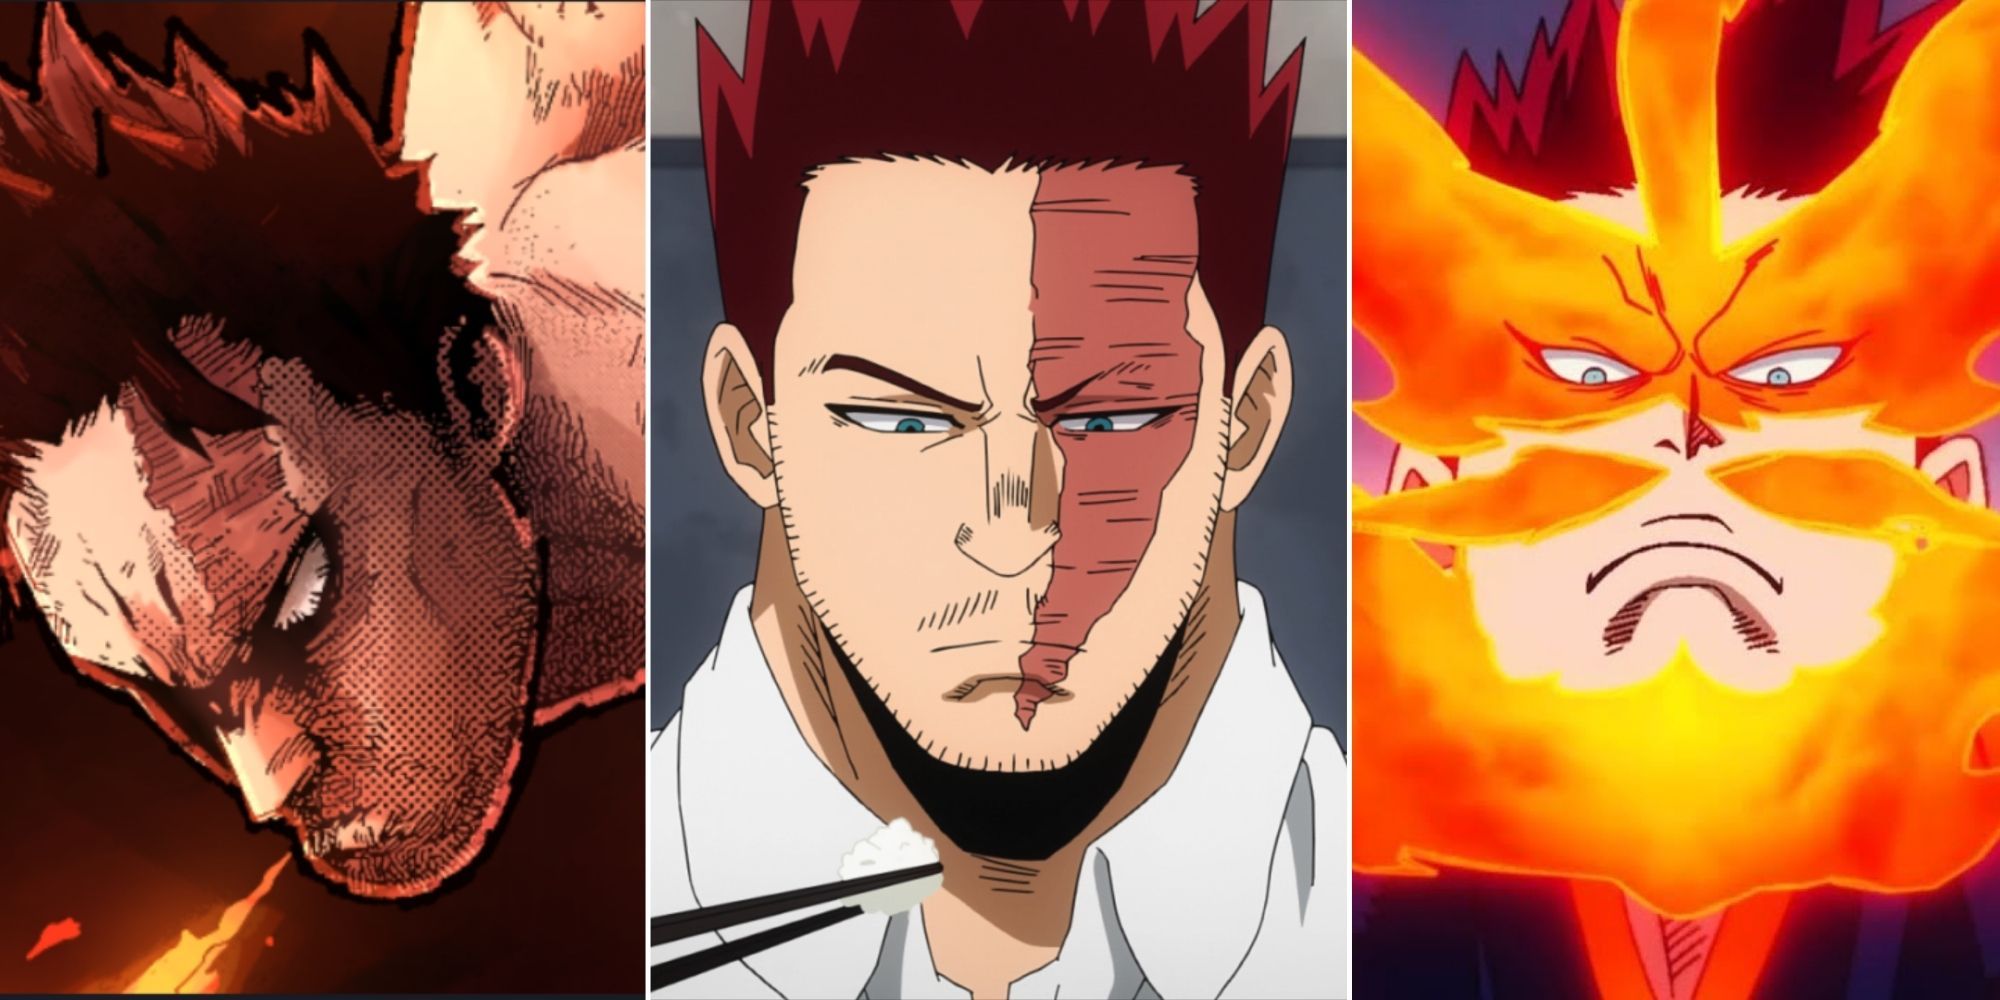 Why Endeavor is the most polarizing character in the series